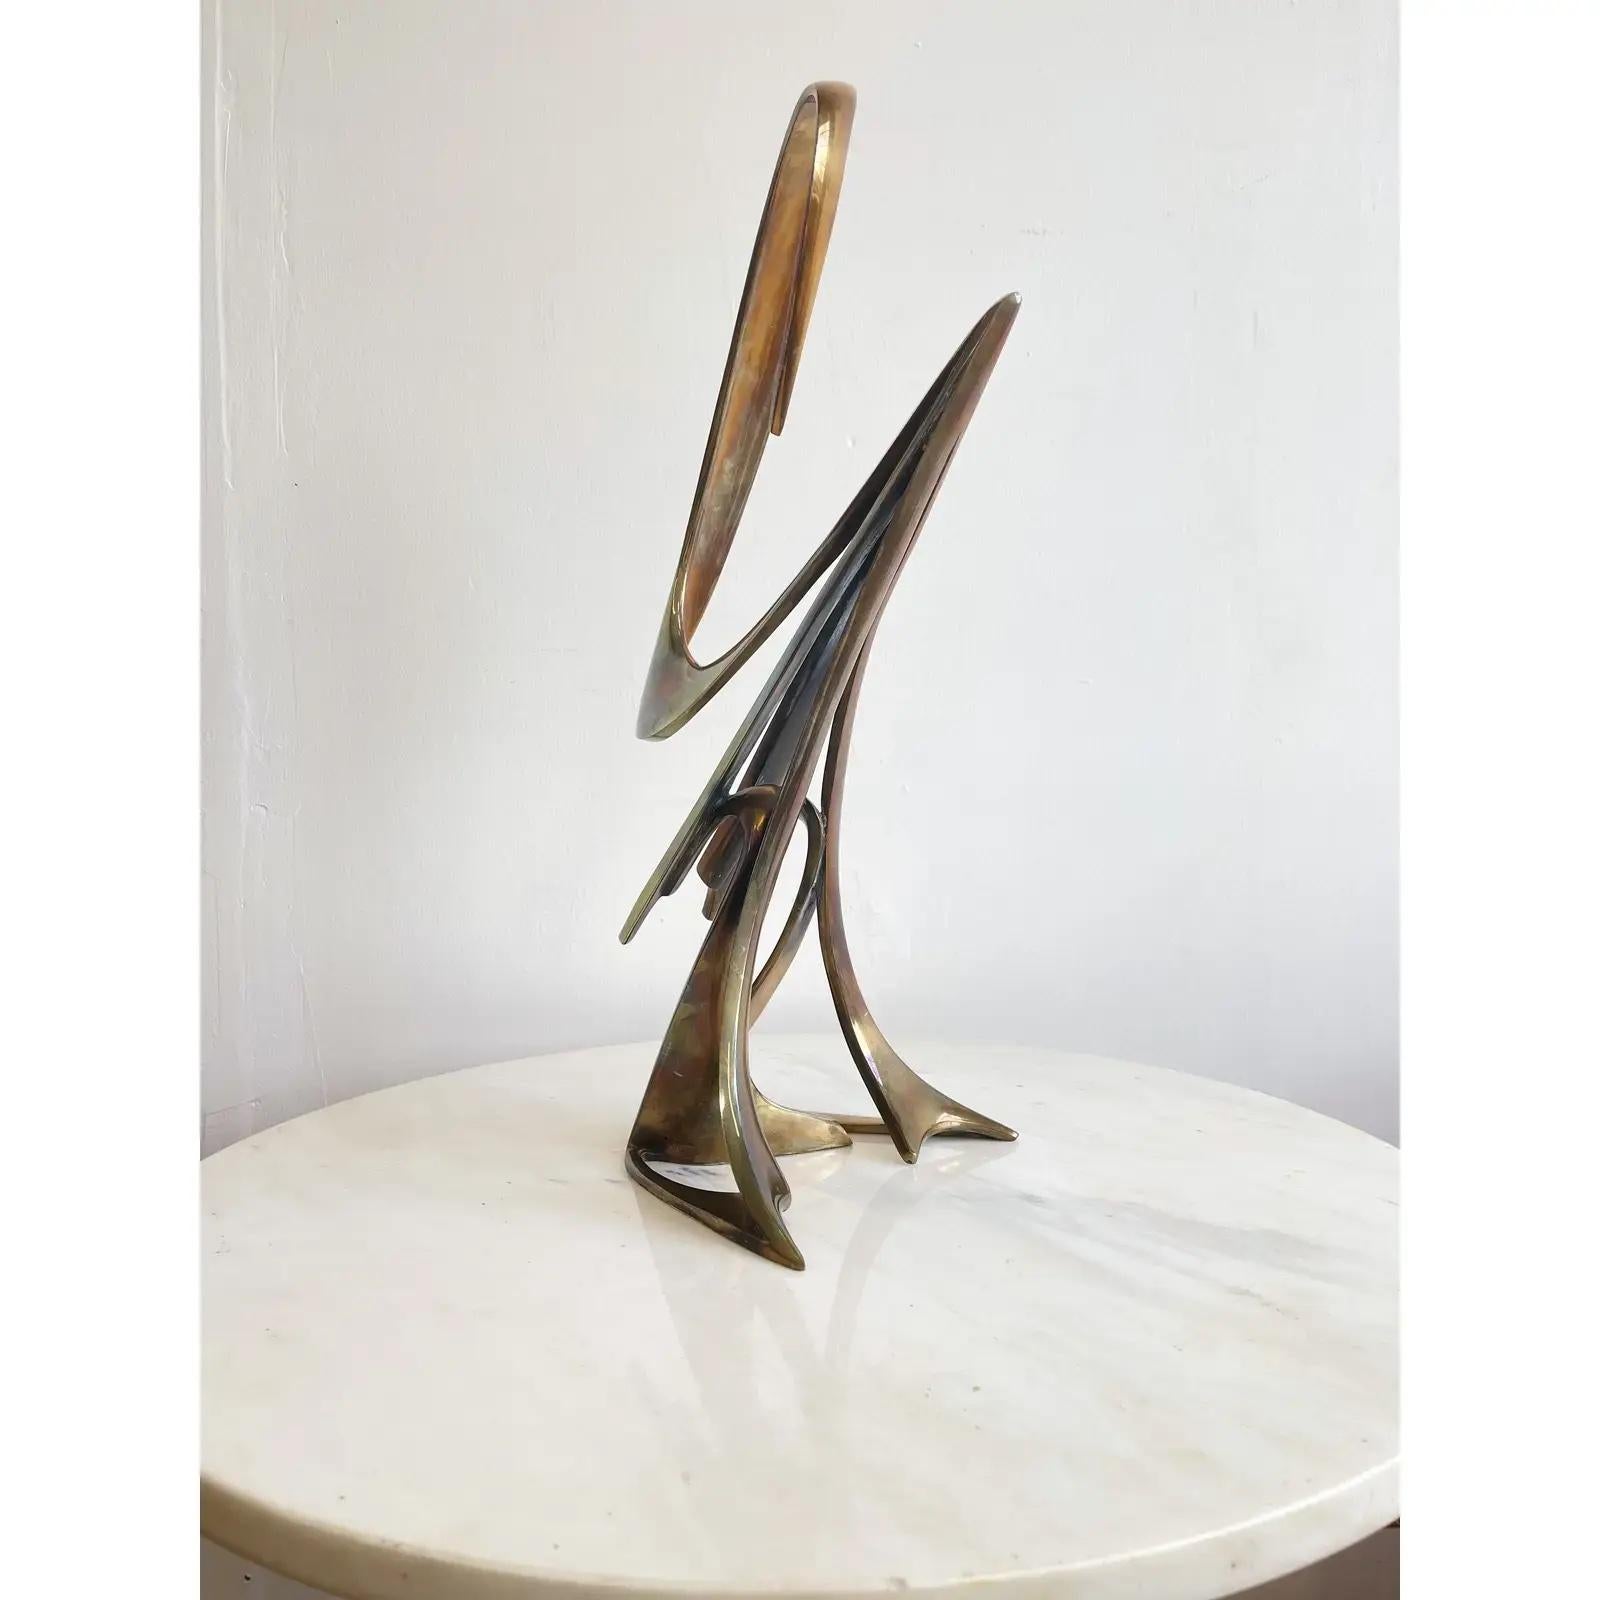 Mid-century bronze sculpture by American Artist Bob Bennett, a very limited edition of only 50 models realized. Signed and dated 1983 and numbered (25/50) at the bottom at the base. Polished bronze, excellent vintage condition. The Sculpture does